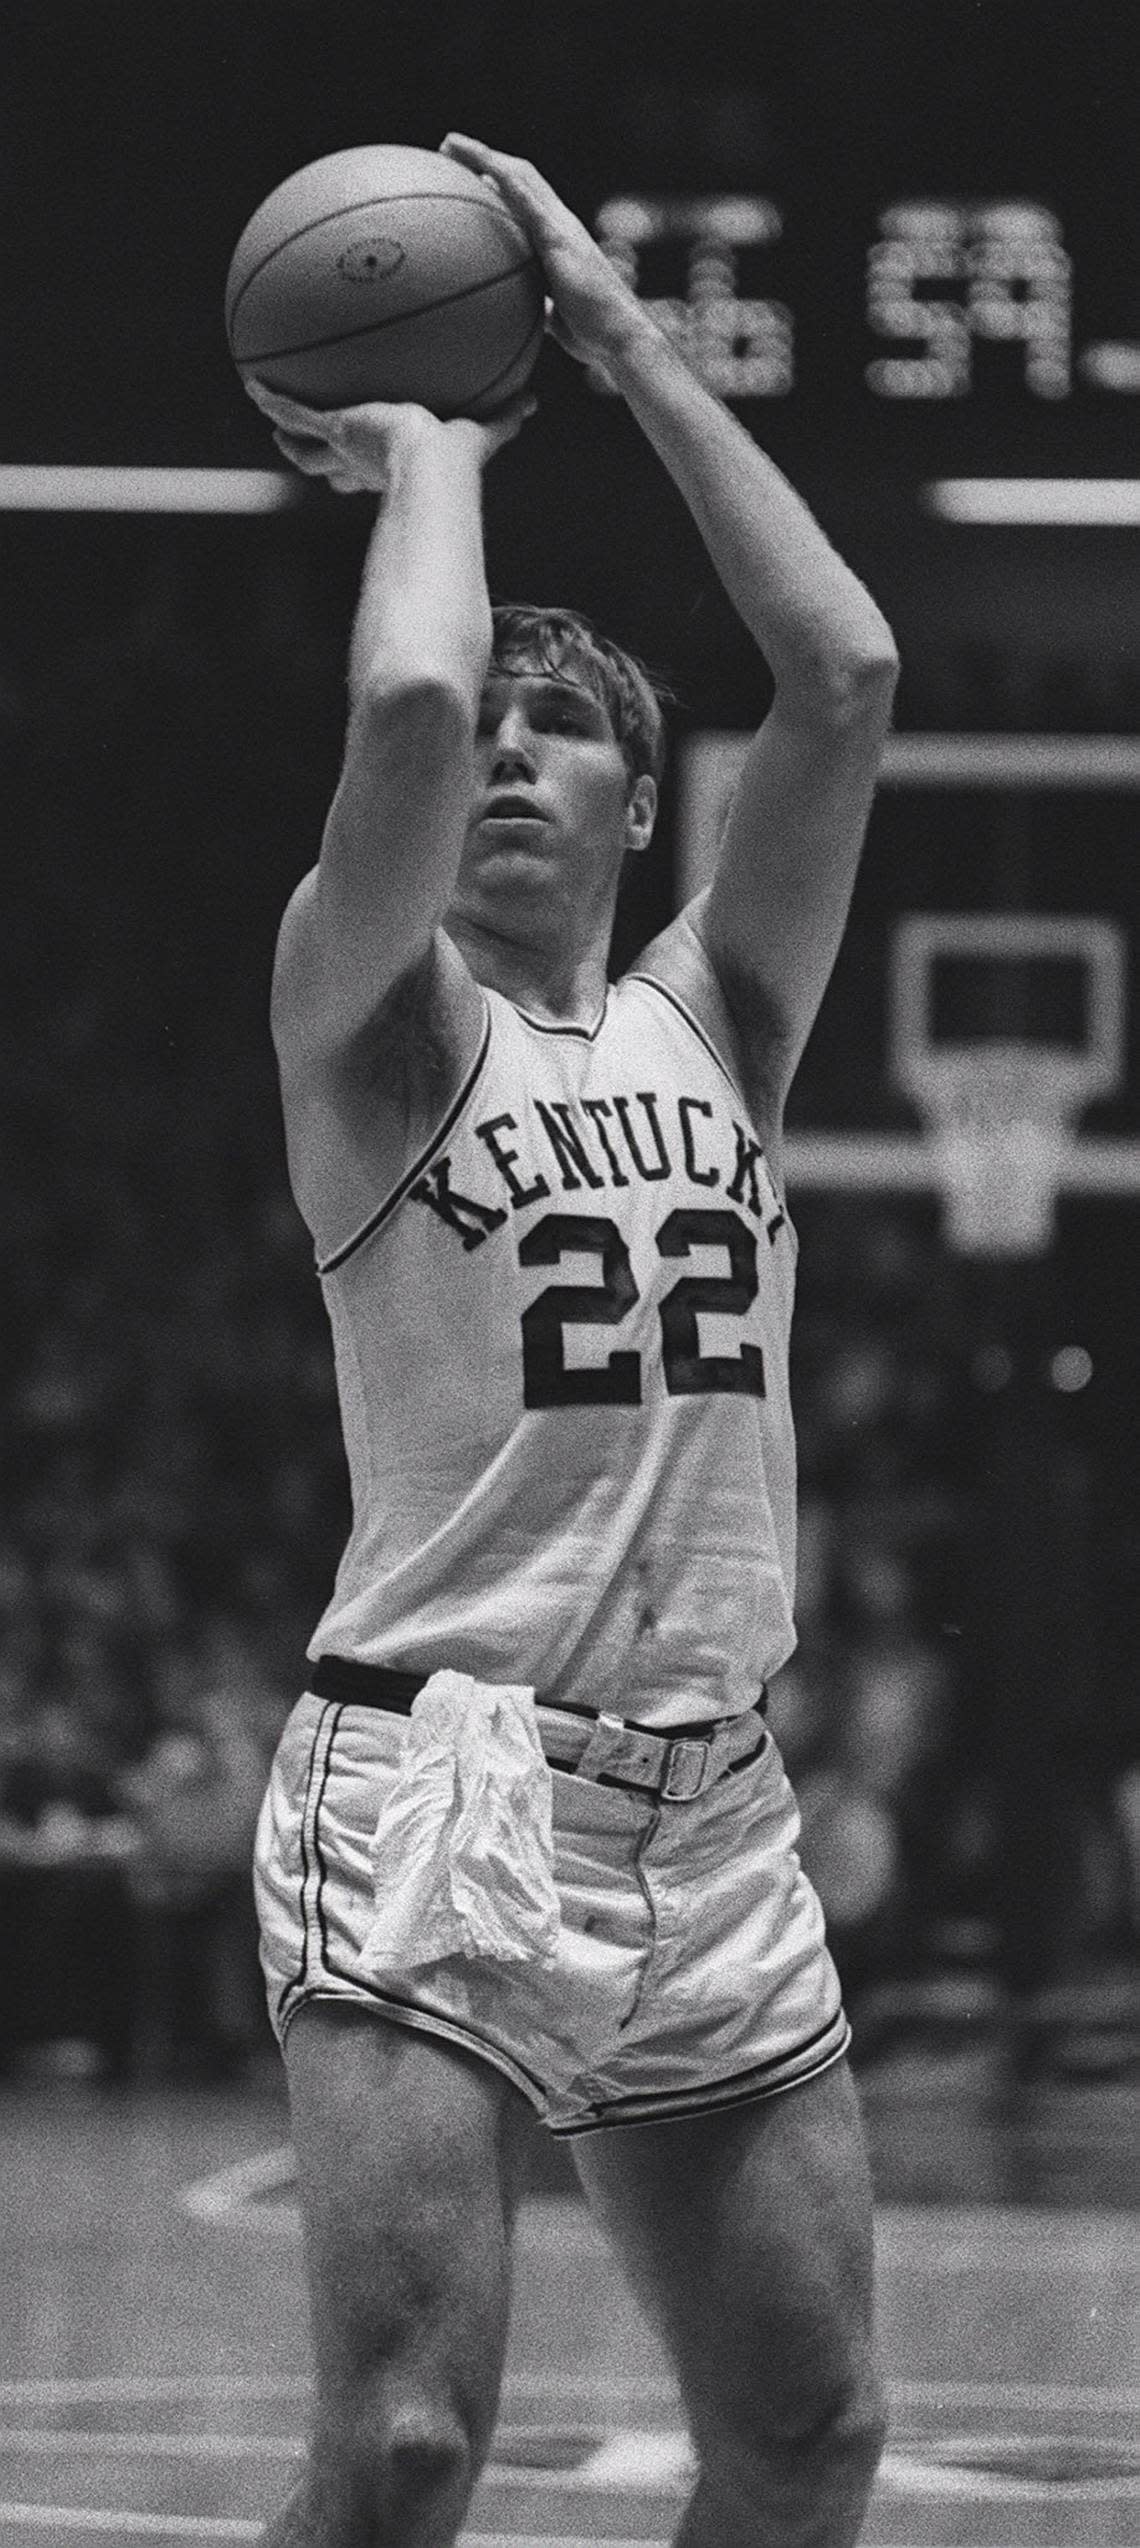 Mike Pratt played for Kentucky from 1967-70, amassing 1,359 points across three seasons.